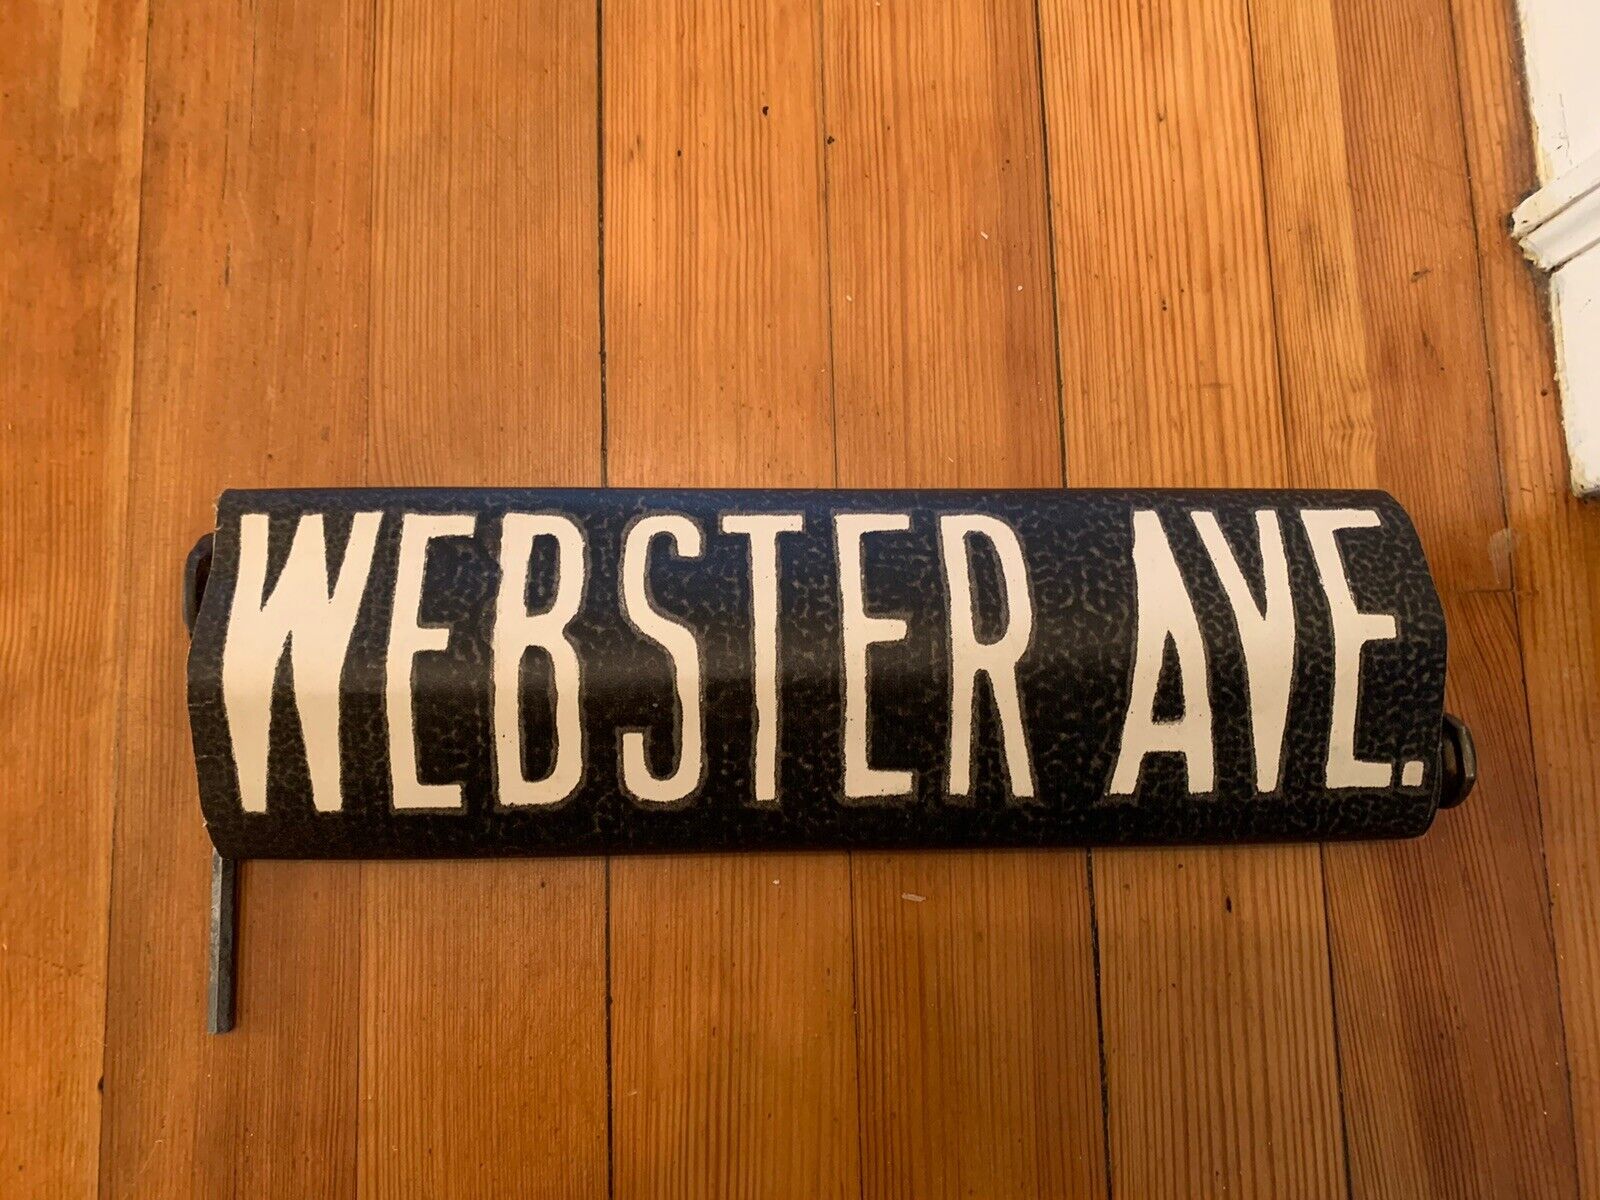 NY NYC THIRD AVE RAILWAY ROLL SIGN SECTION WEBSTER AVENUE MELROSE WOODLAWN BRONX